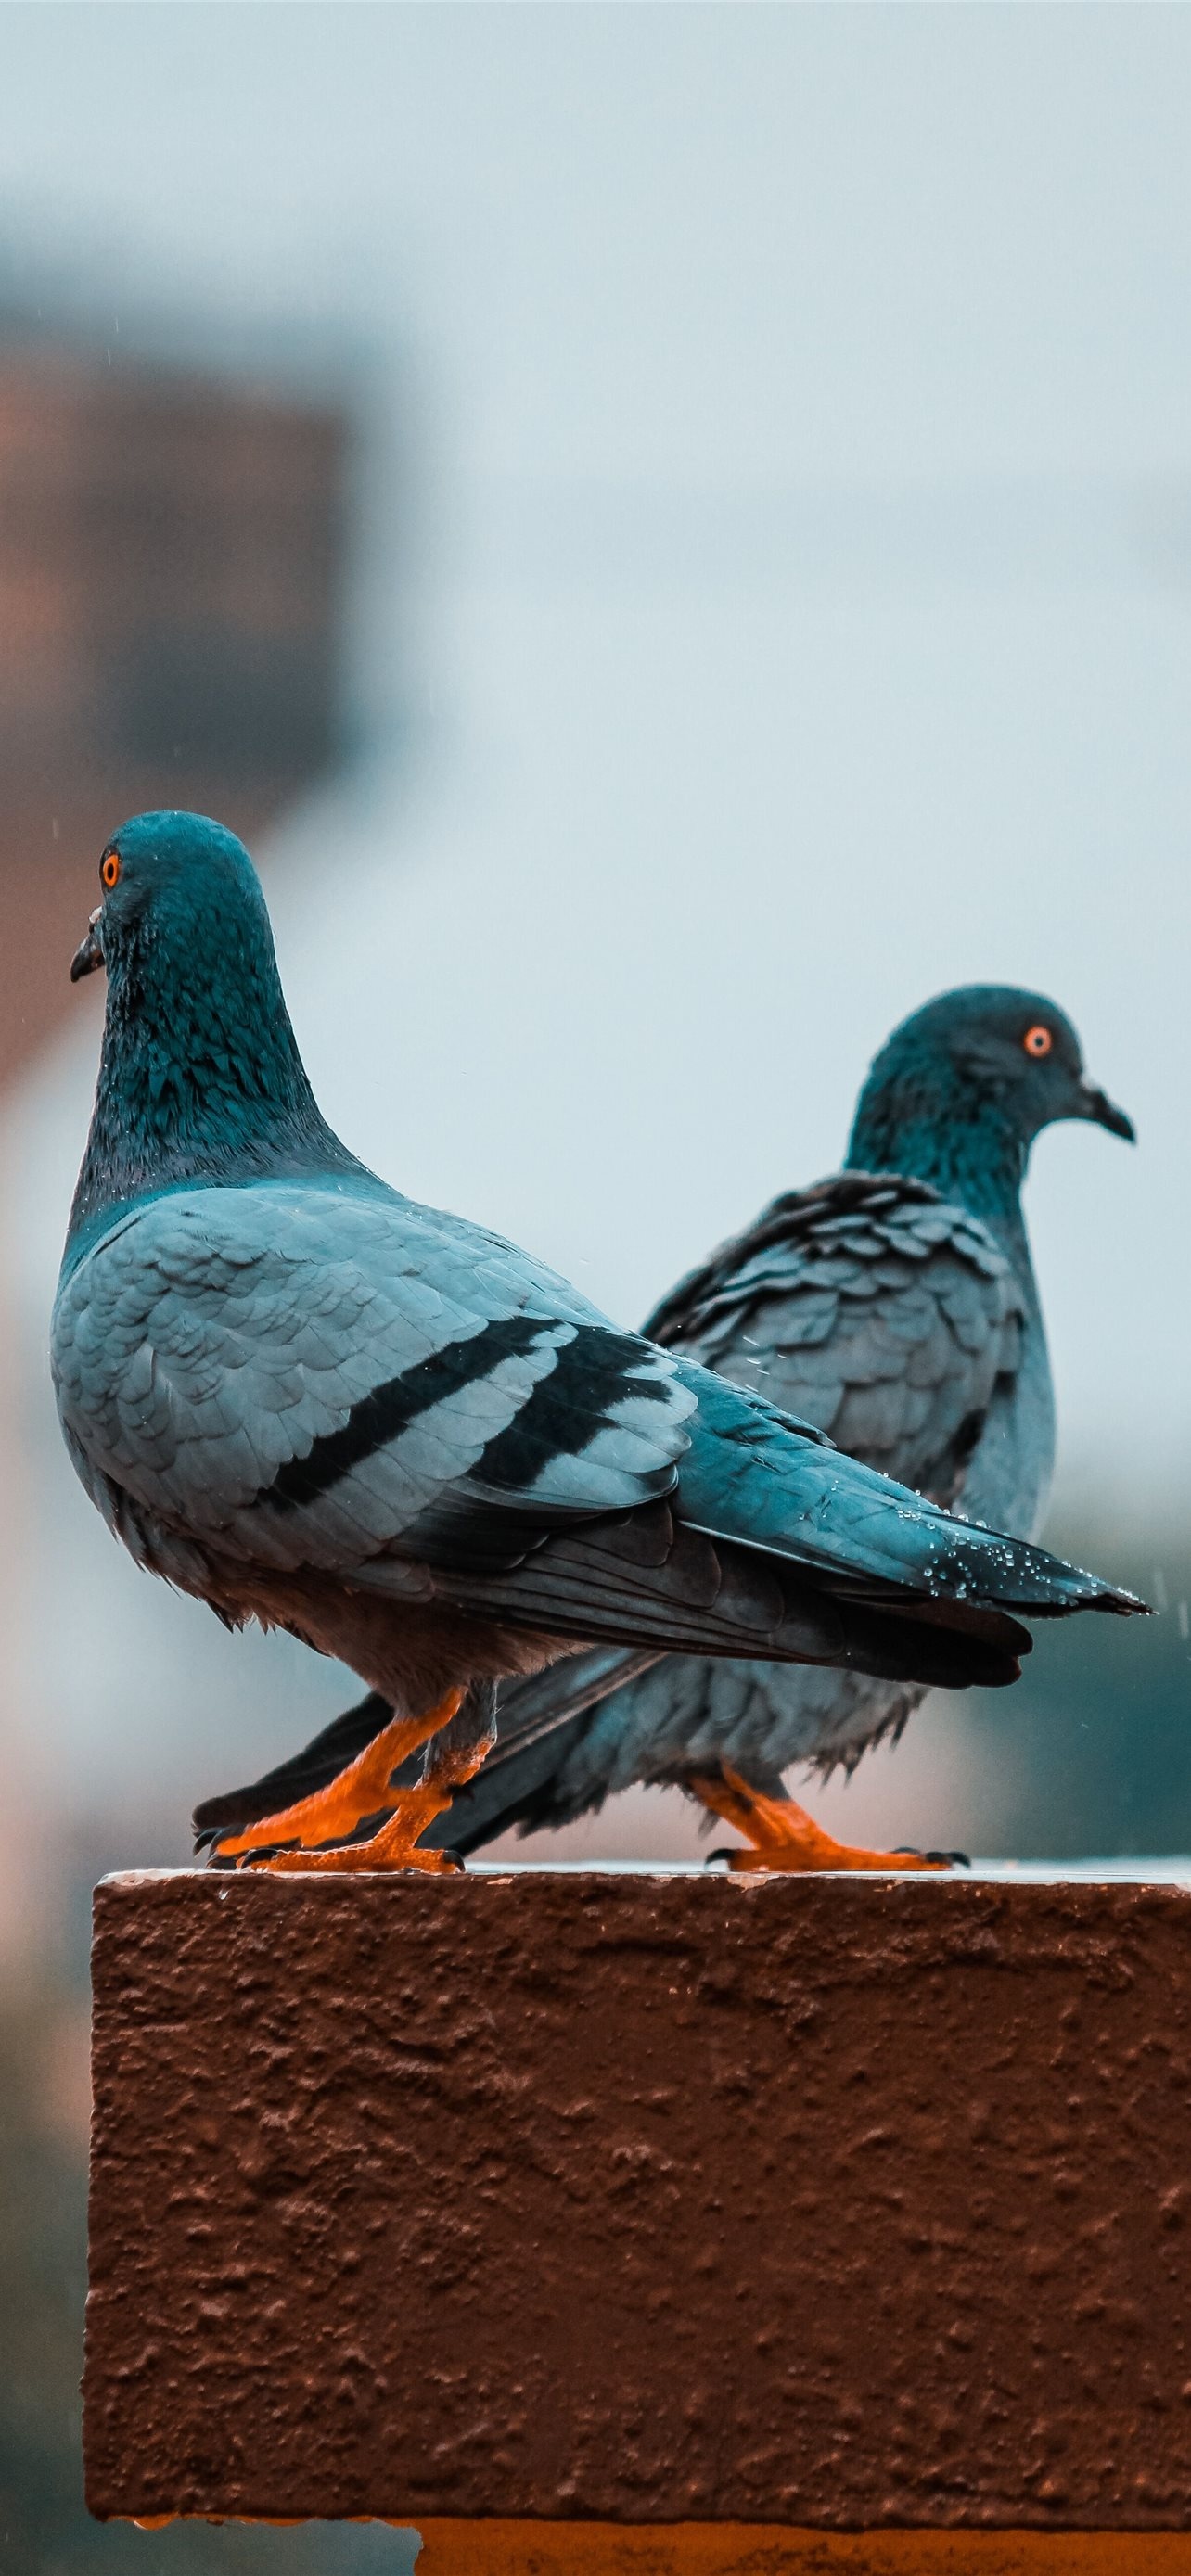 Pigeon: Doves have soft feathers that are typically gray or brown. 1290x2780 HD Wallpaper.